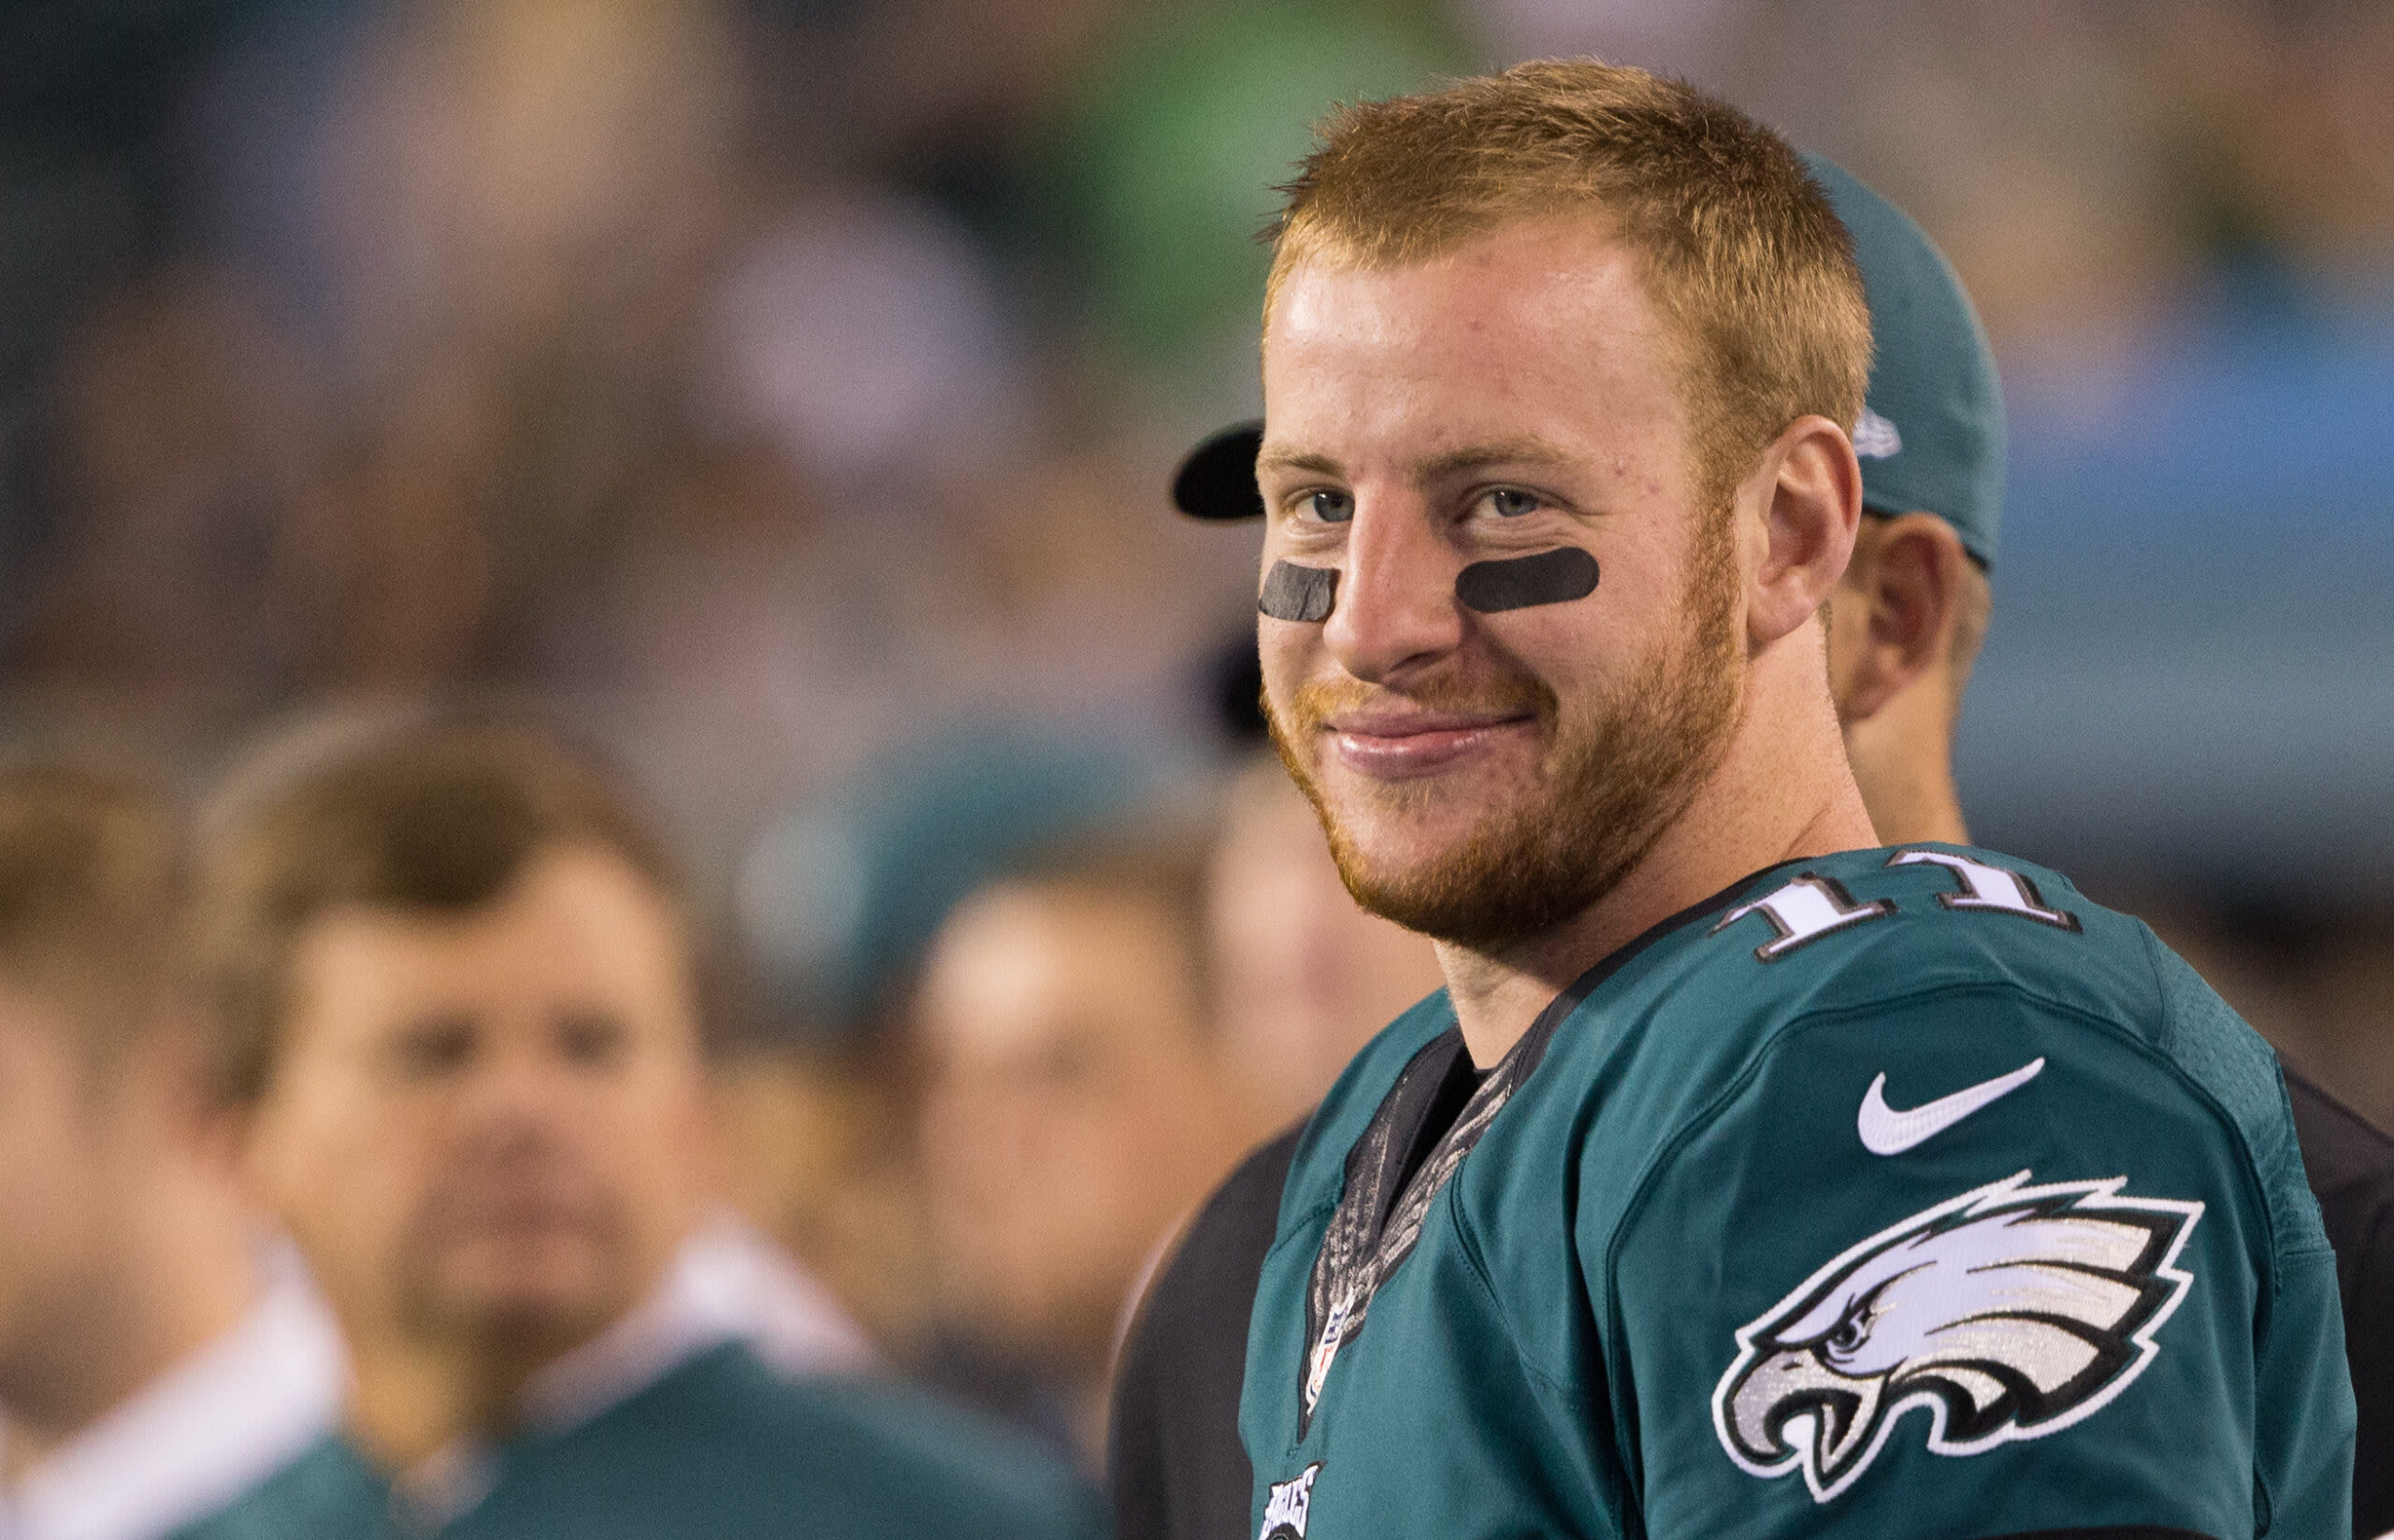 WATCH: Carson Wentz takes the field at OTAs donning No. 11 jersey